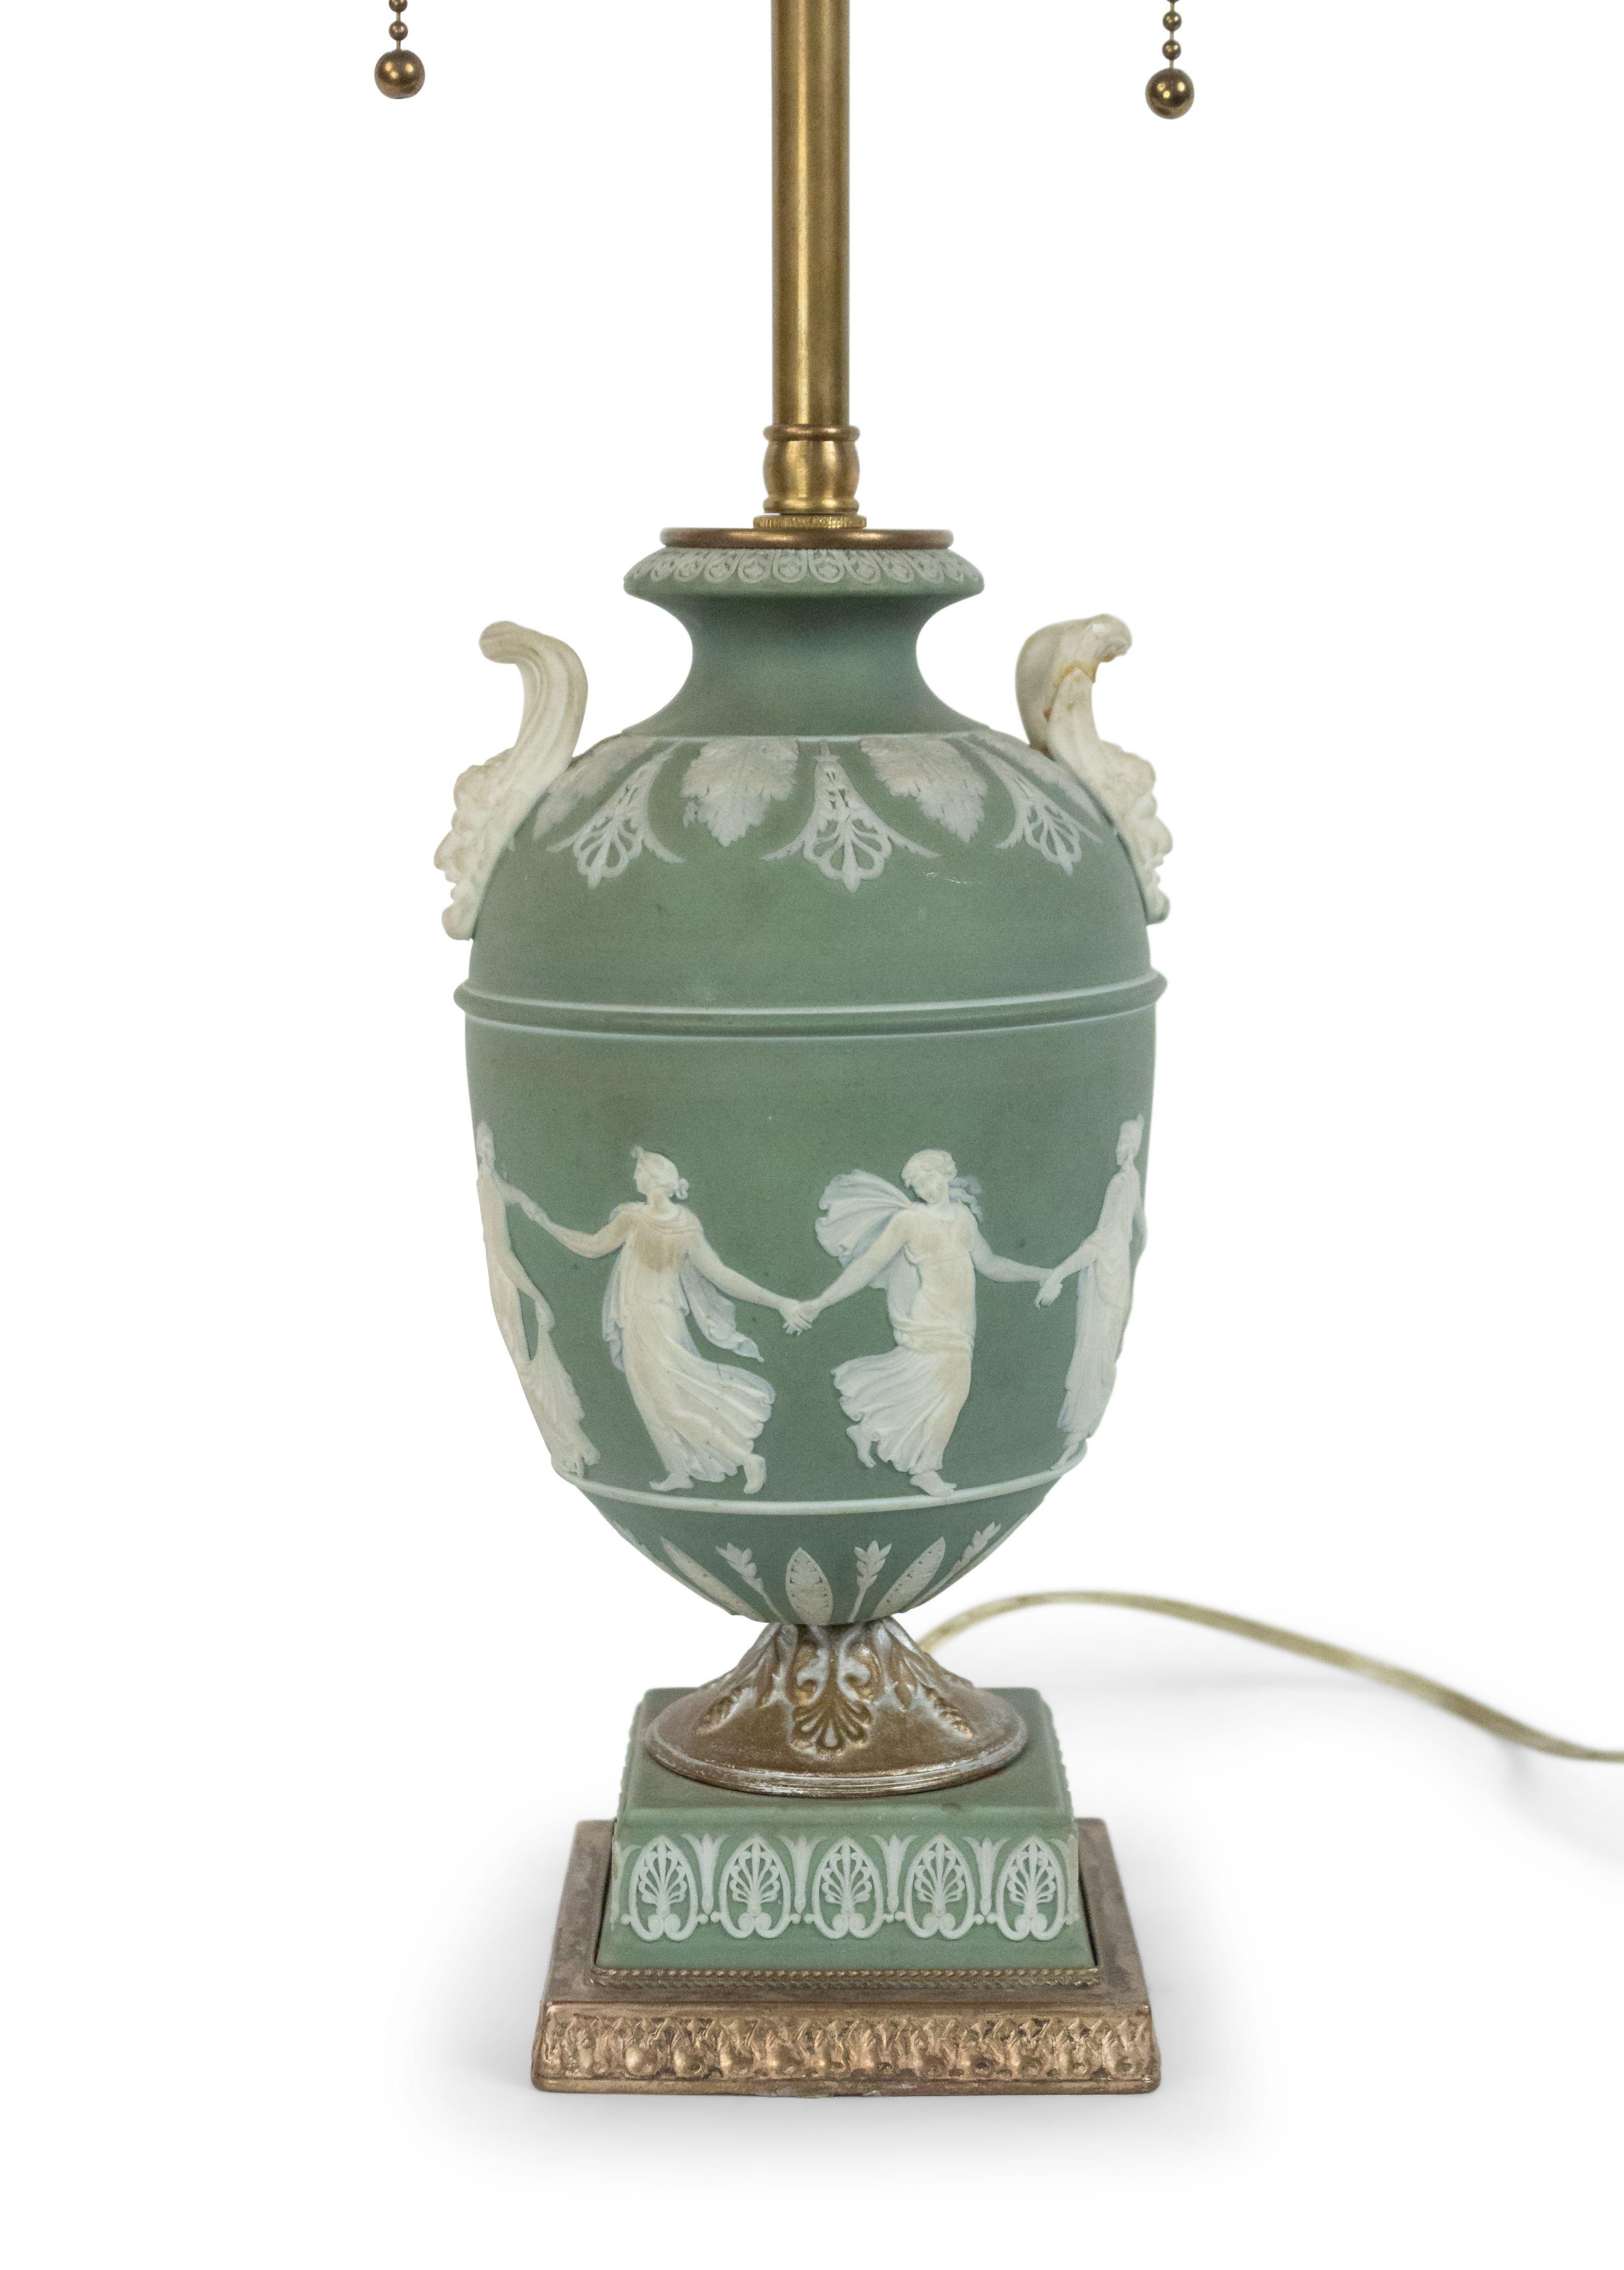 English Adam style (19th Century) green & white Wedgwood porcelain urn shaped table lamp with classical figures and handles.